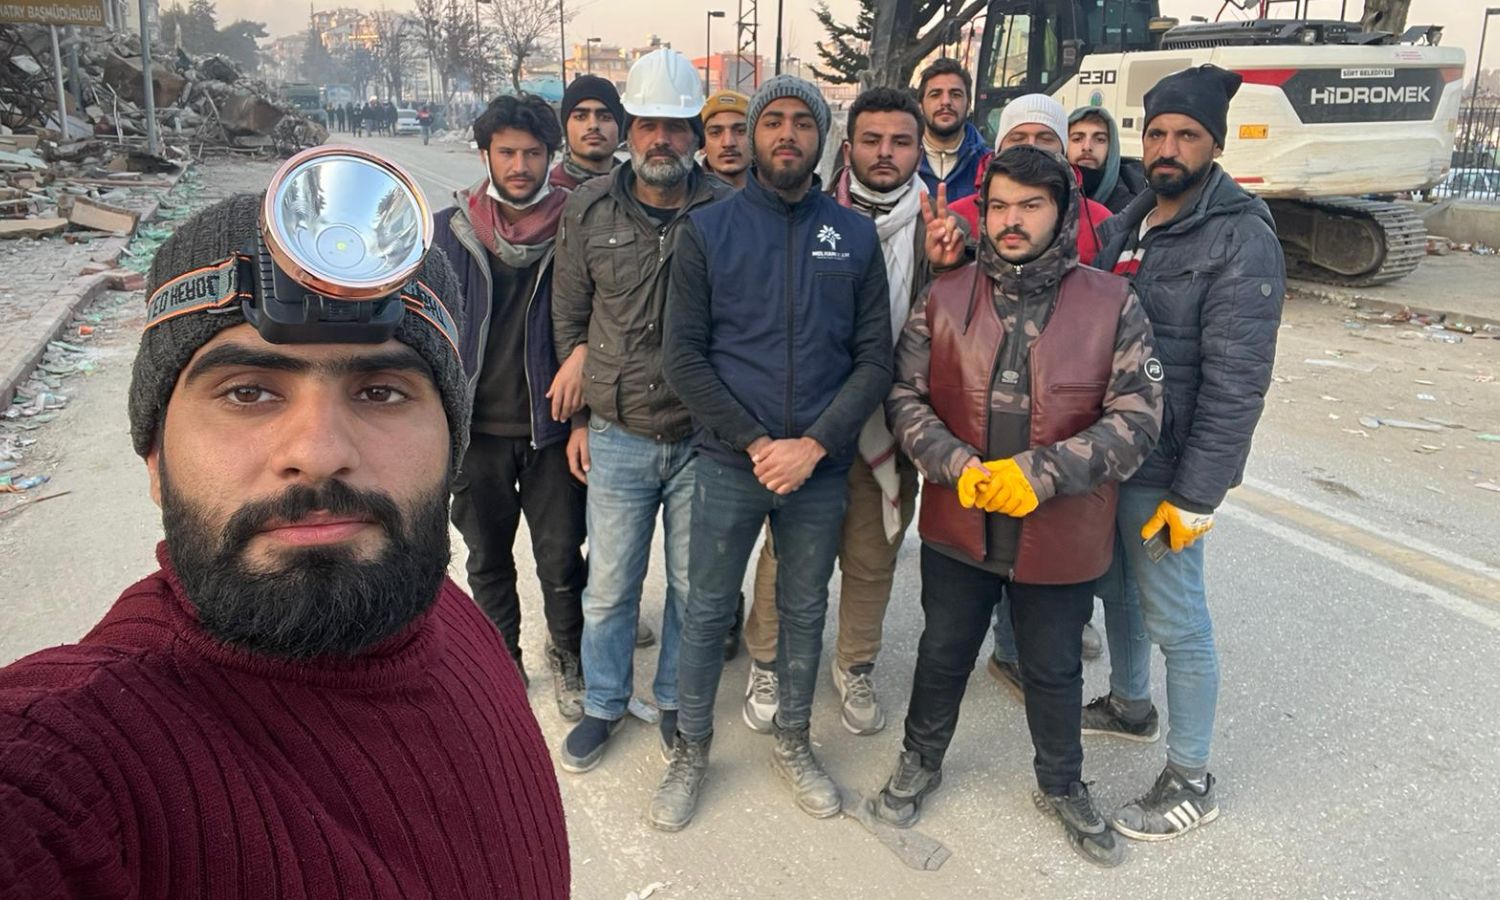 Syrian students during their participation in search and rescue operations in southern Turkey - February 12, 2023 (Facebook/Ahed al-Salibi)